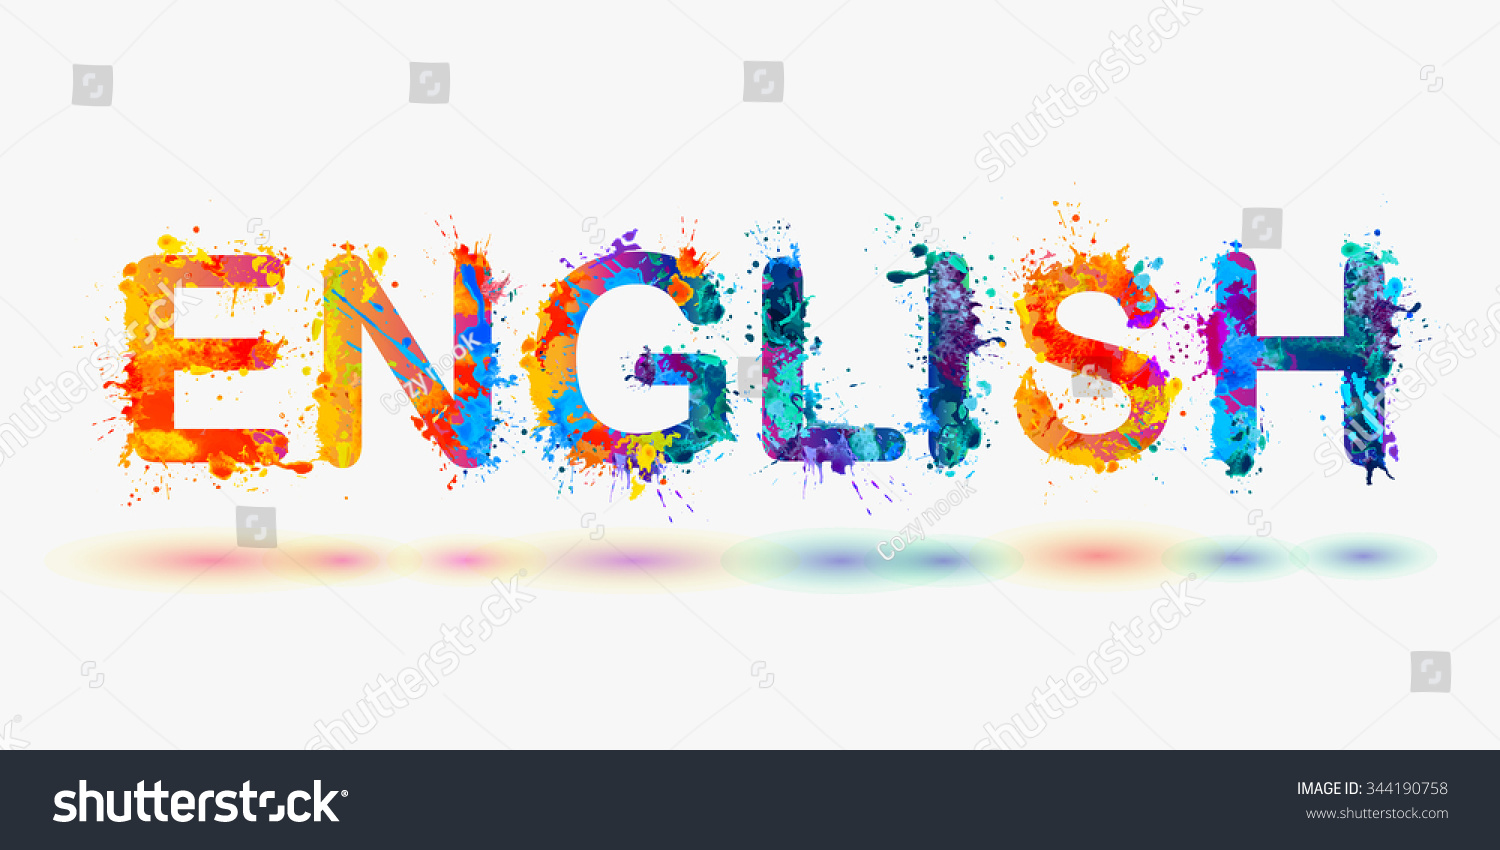 clipart of the word english - photo #1